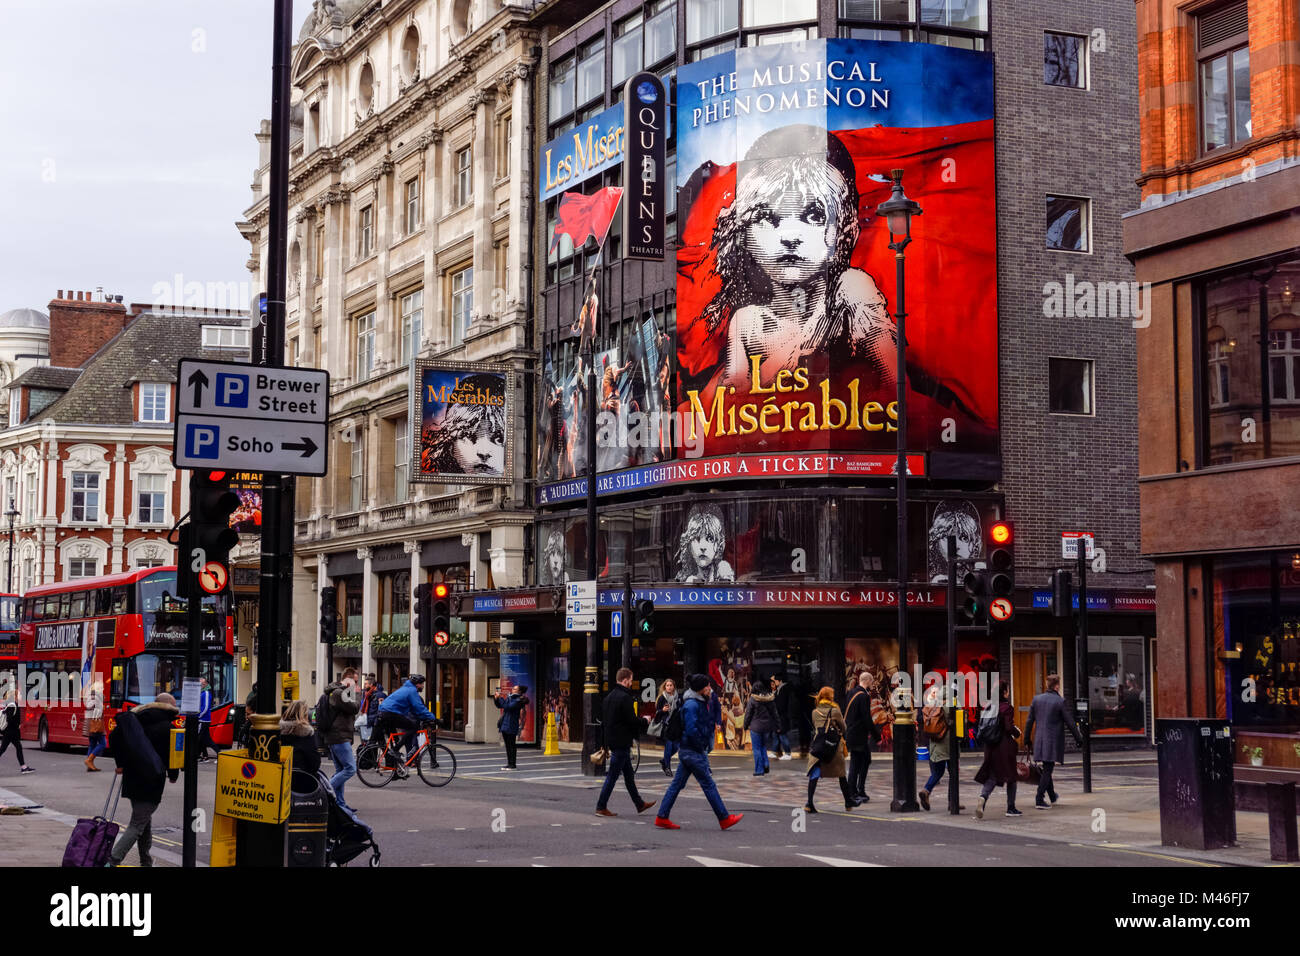 Les Miserables at the Sondheim Theatre at West End on Shaftesbury Avenue, London England United Kingdom UK Stock Photo